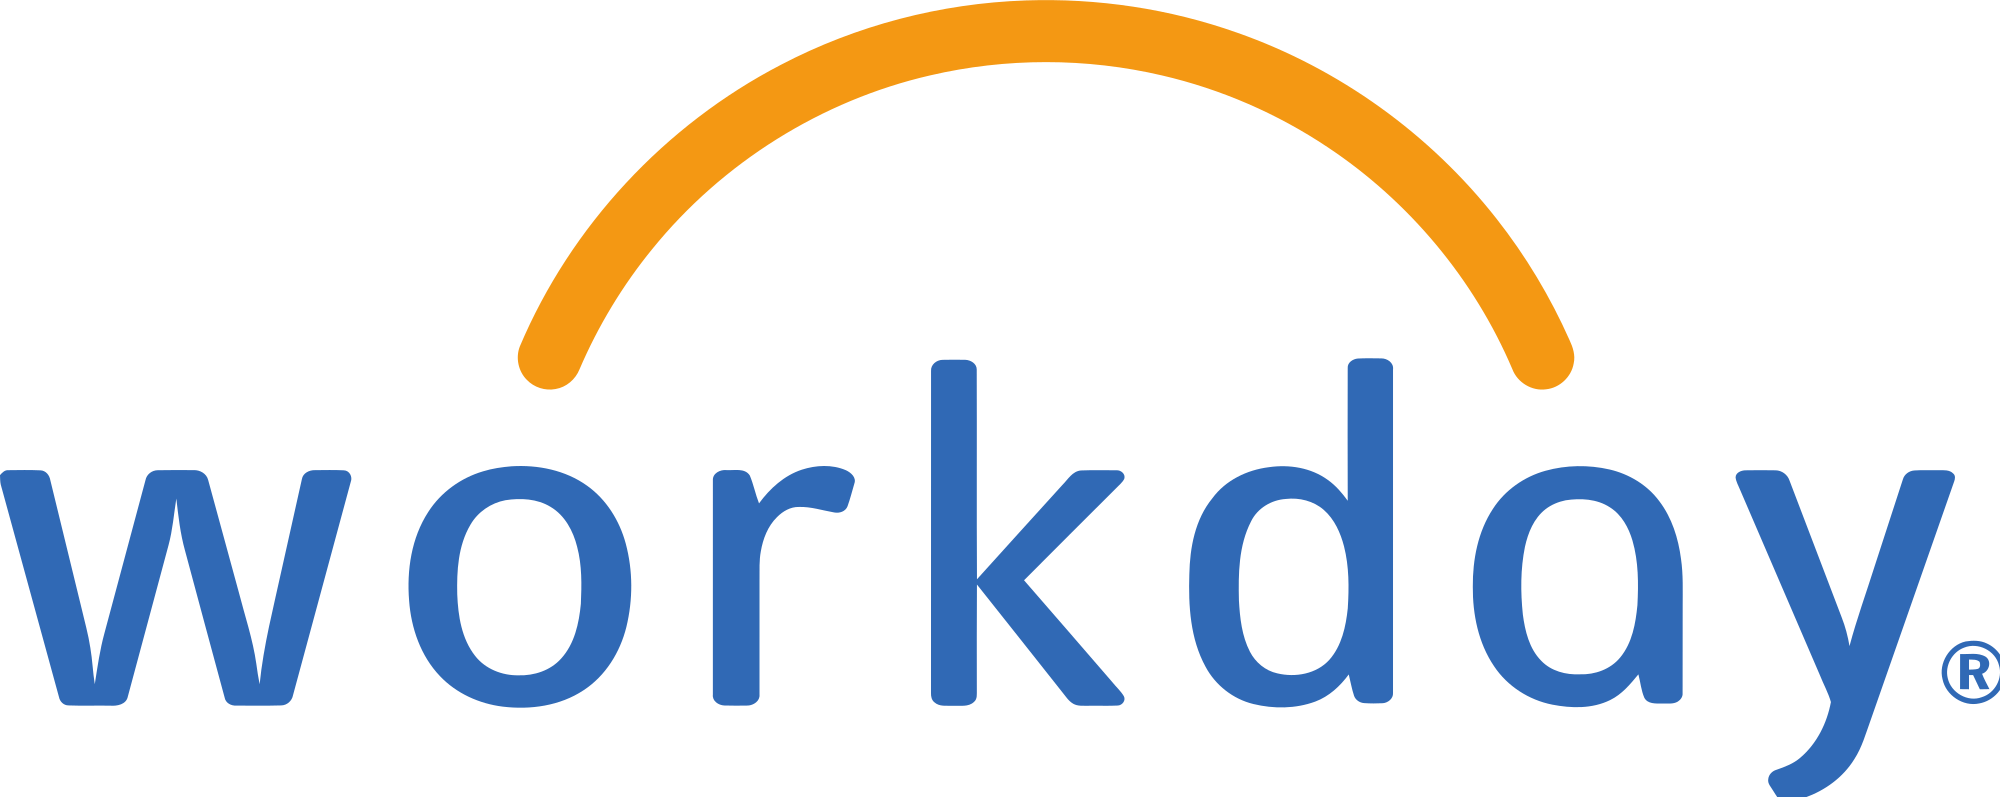 2000px-Workday_logo.svg.png